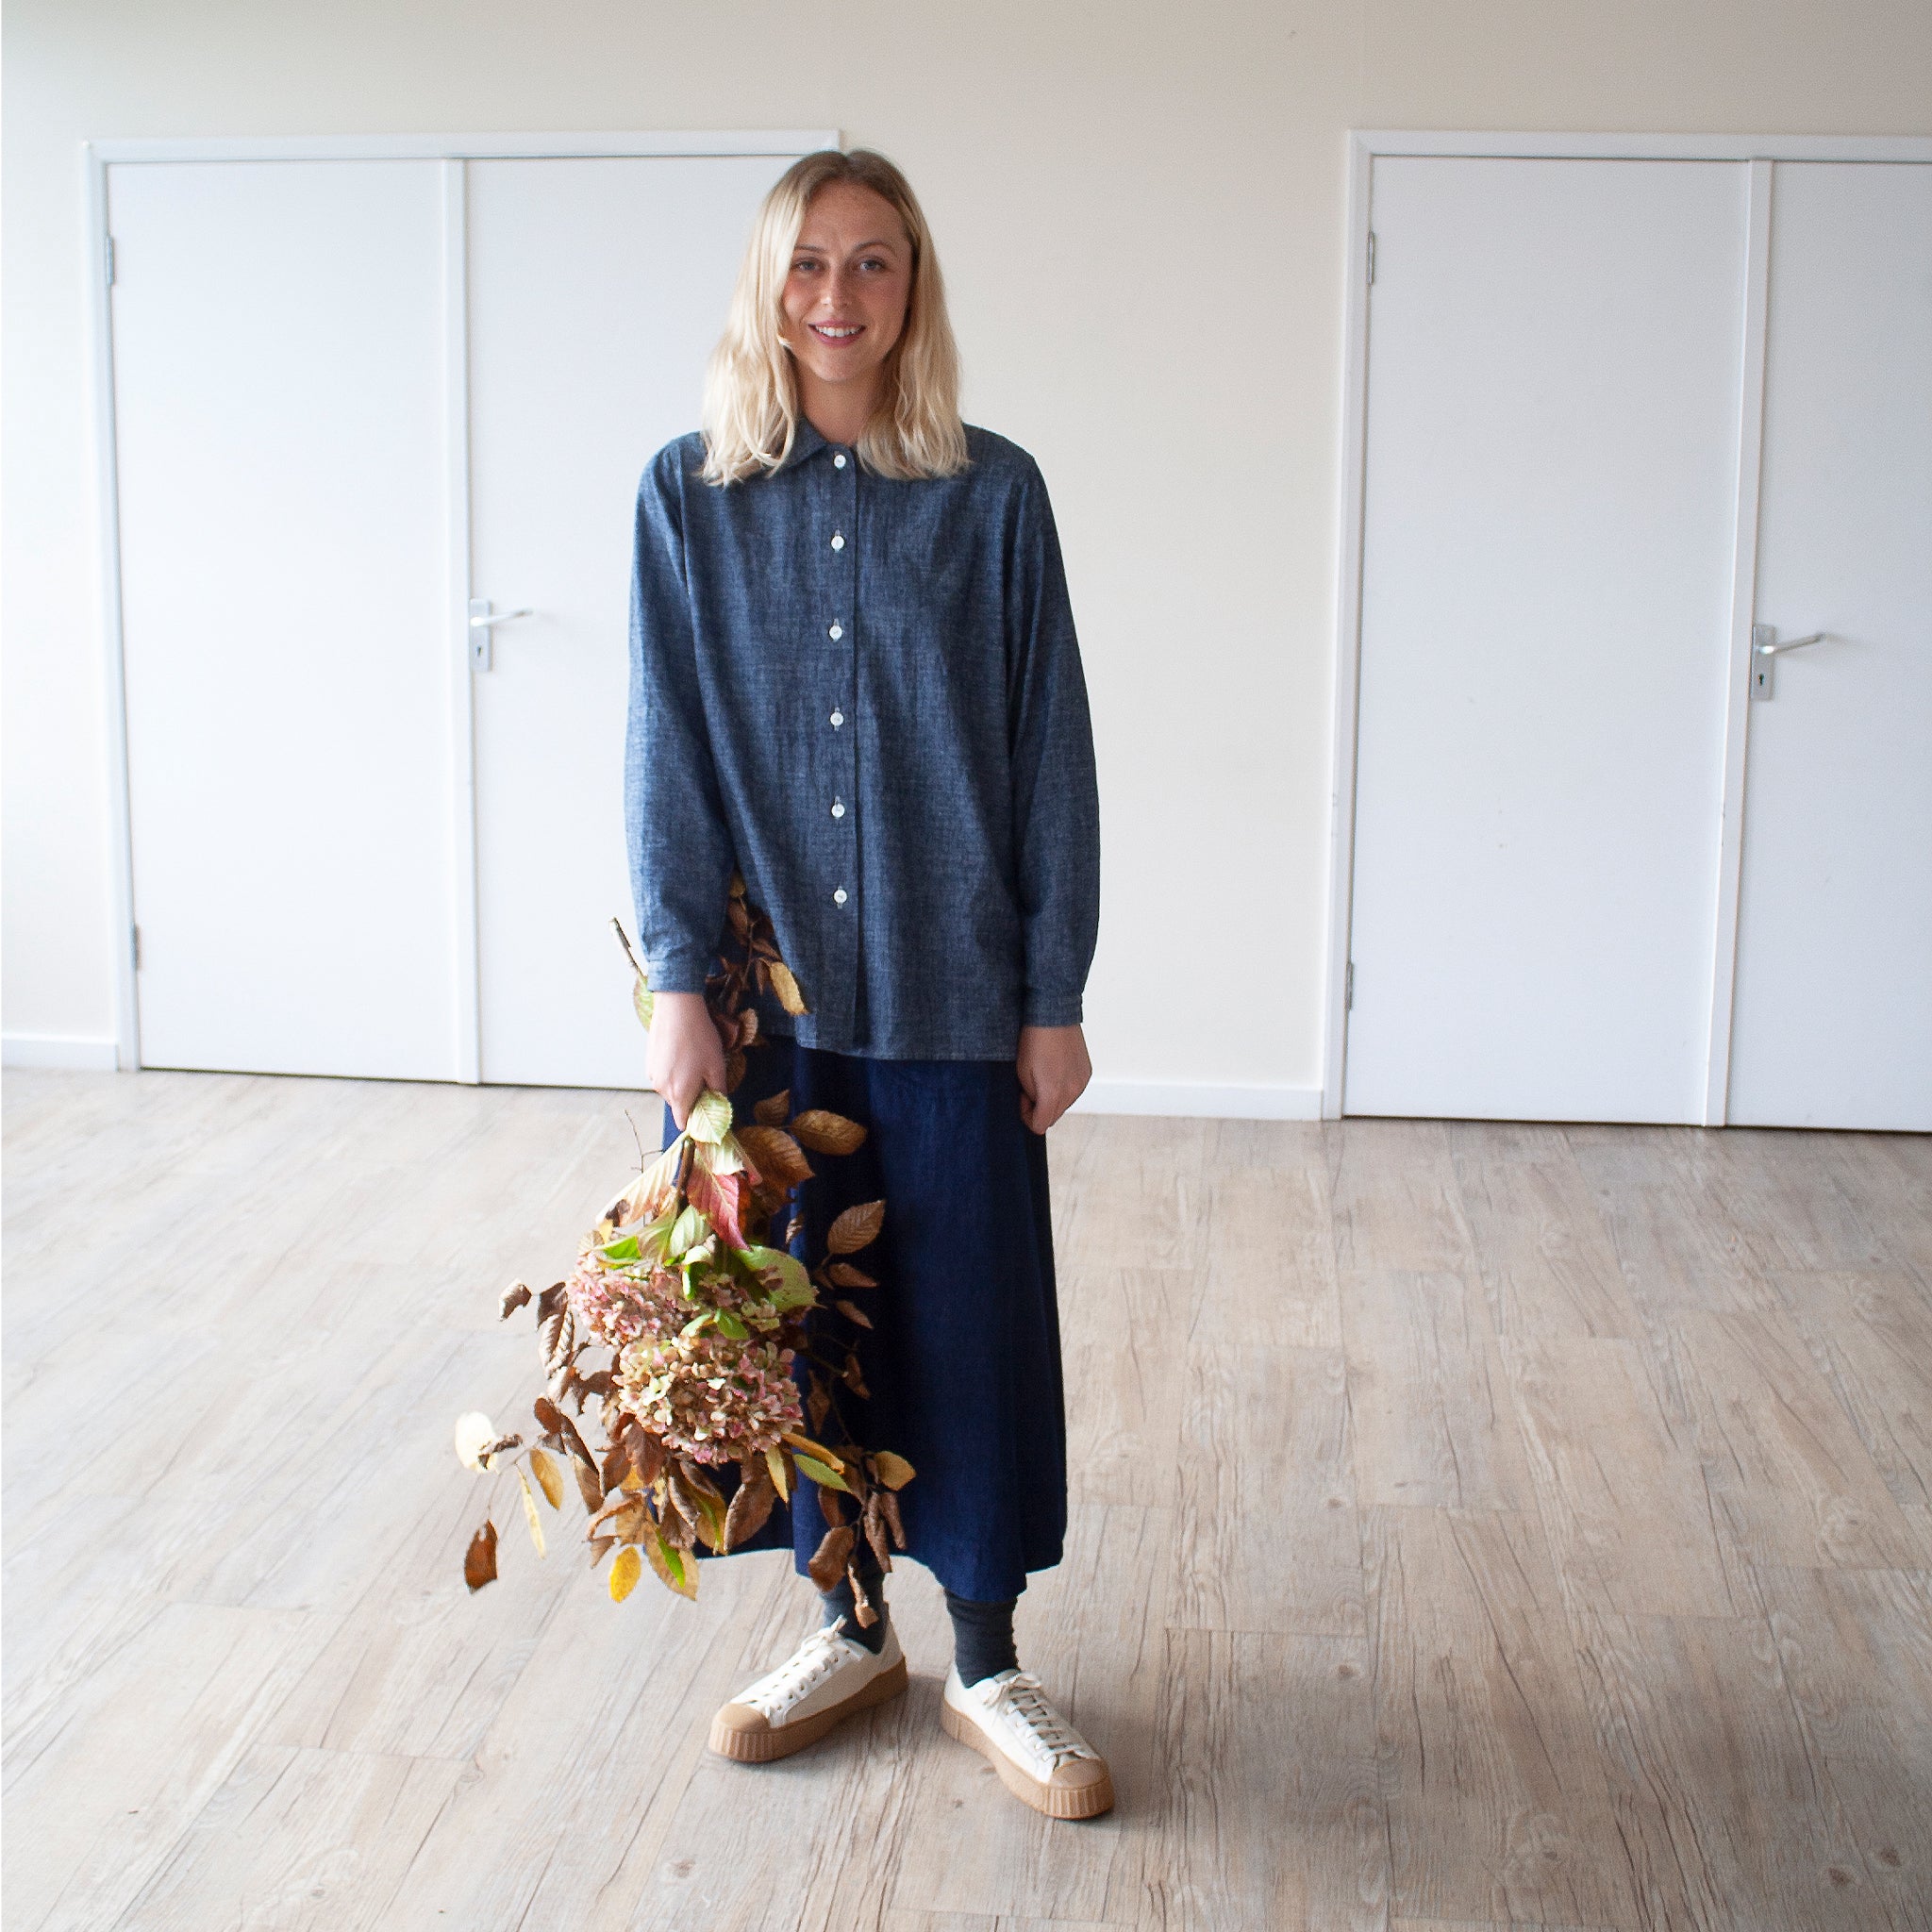 smiling blonde young woman standing in a sunlit room wearing a blue cotton hemp shirt, she is holding s large bunch of autumnal leaves and flowers